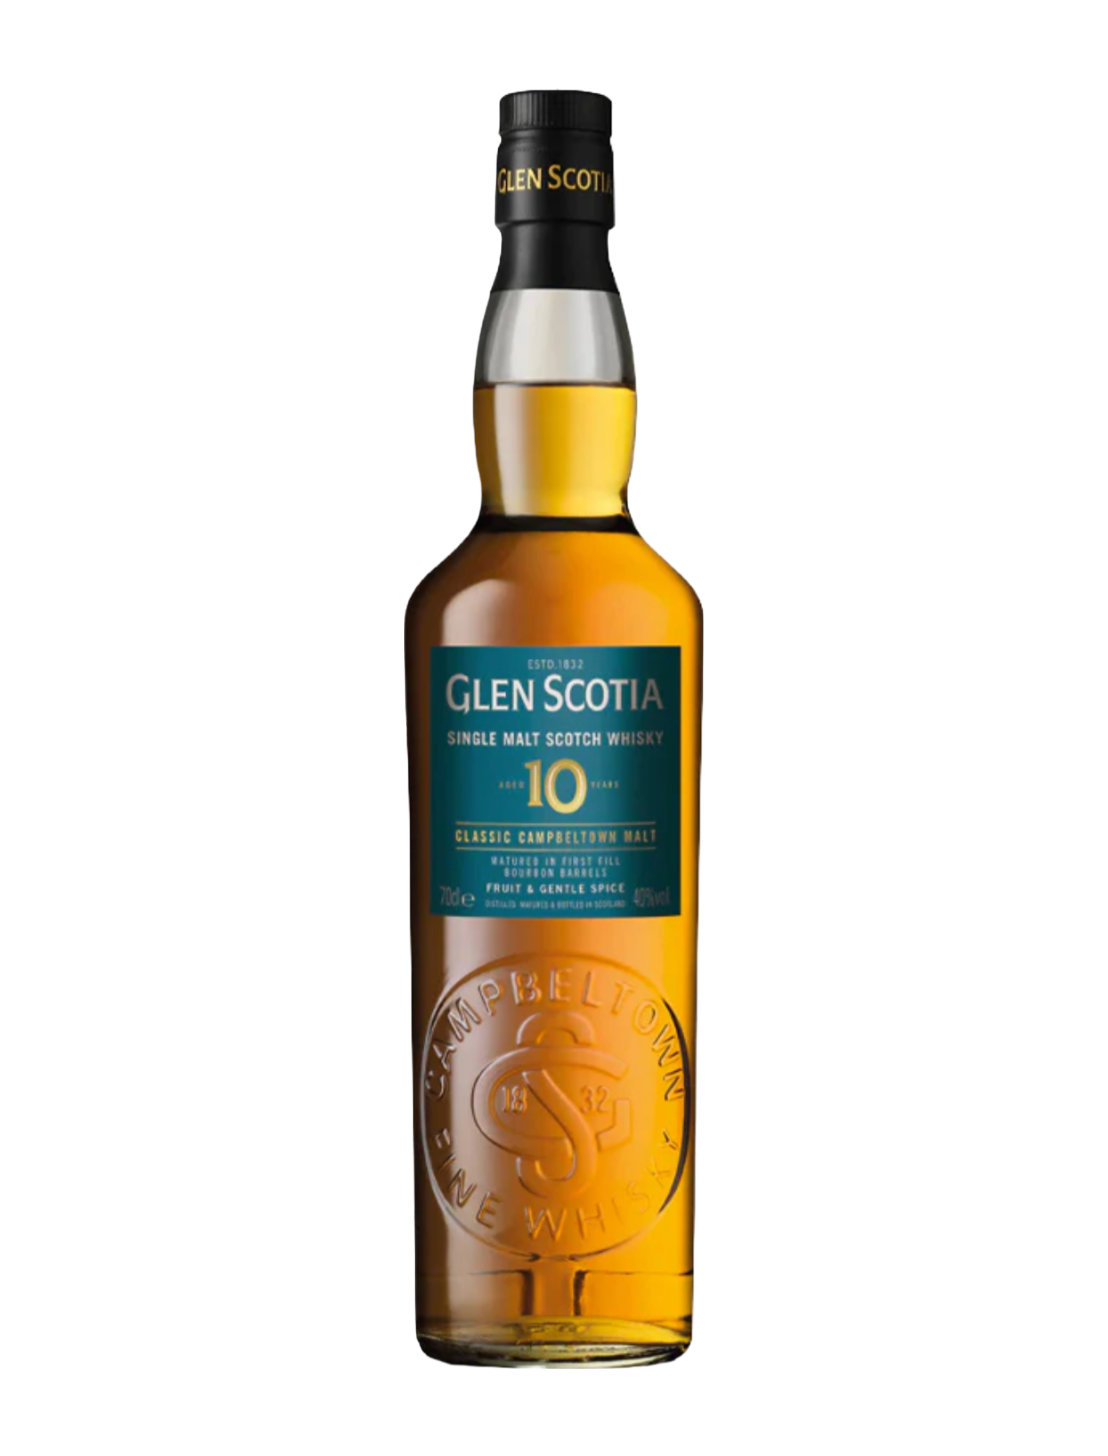 An elegant bottle of Glen Scotia 10 Year Old Cask Strength in front of a plain white background